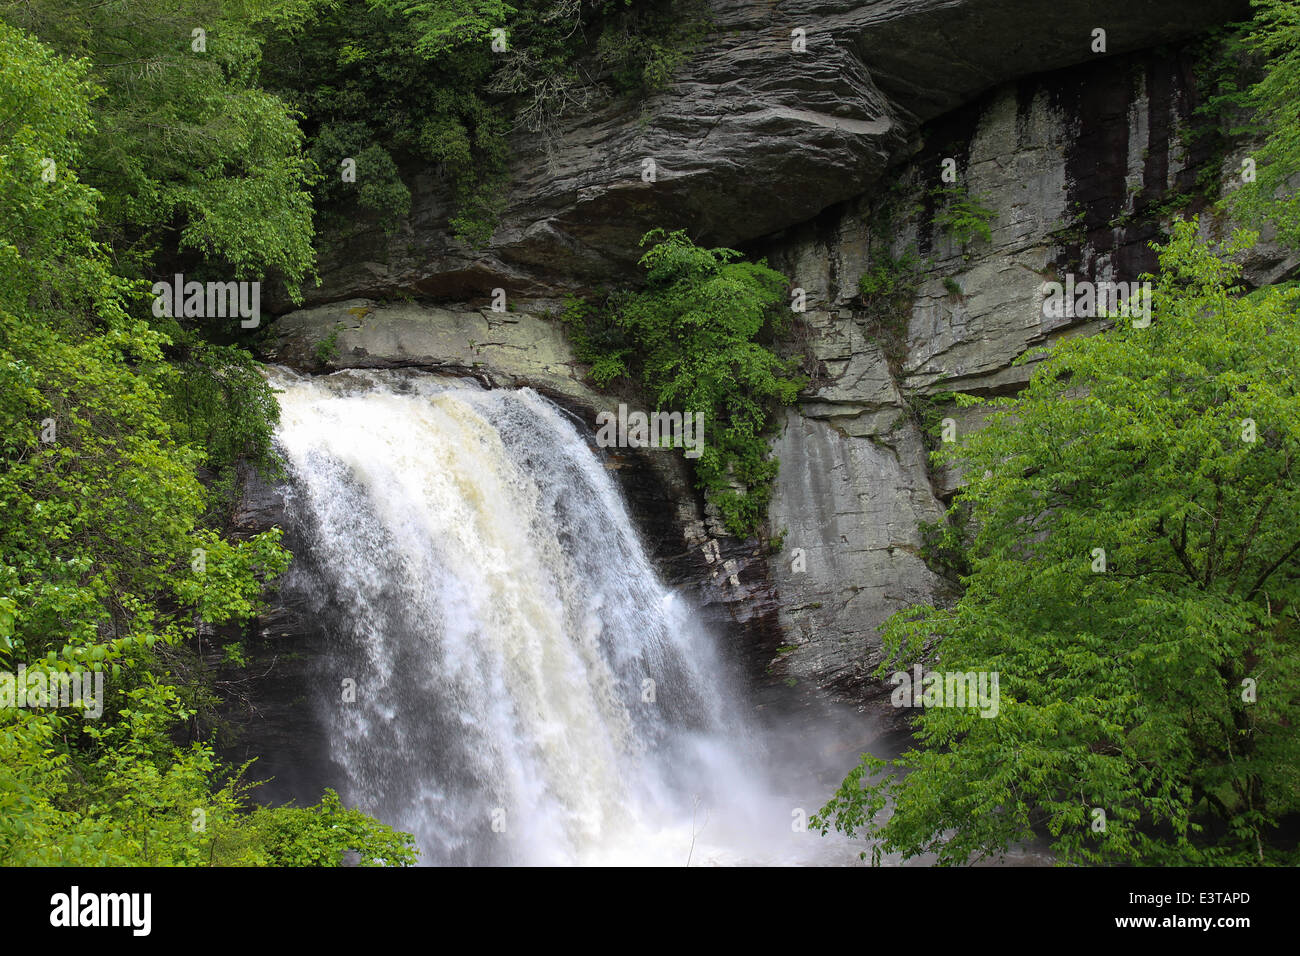 Looking Glass Falls in Pisgah National Forest near Brevard, NC after a substantial amount of rain. Stock Photo